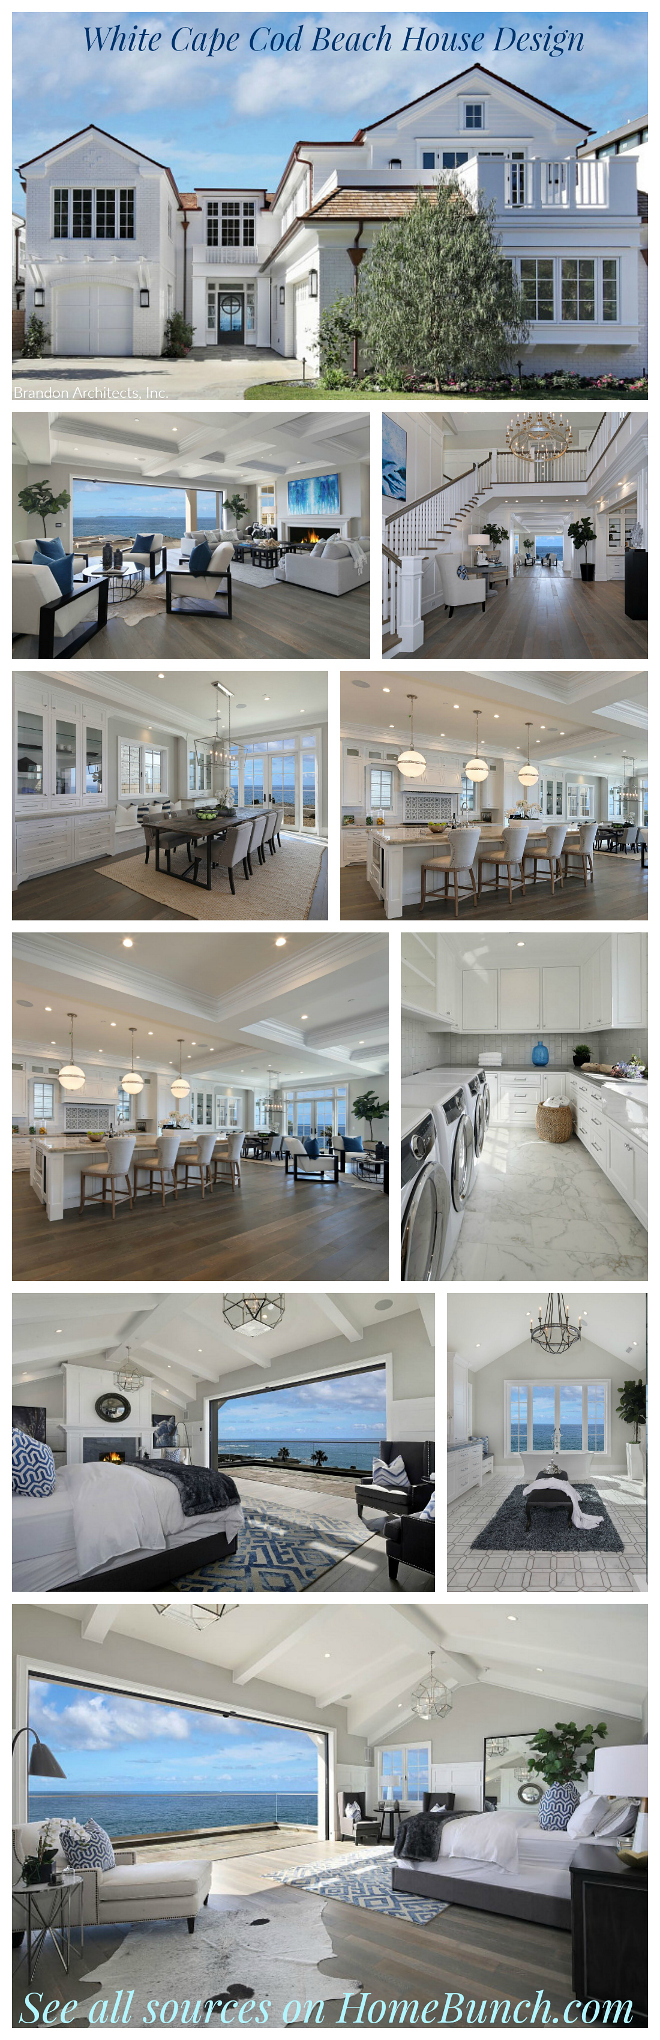 White Cape Cod Beach House Design. See all sources and complete house tour on Home Bunch